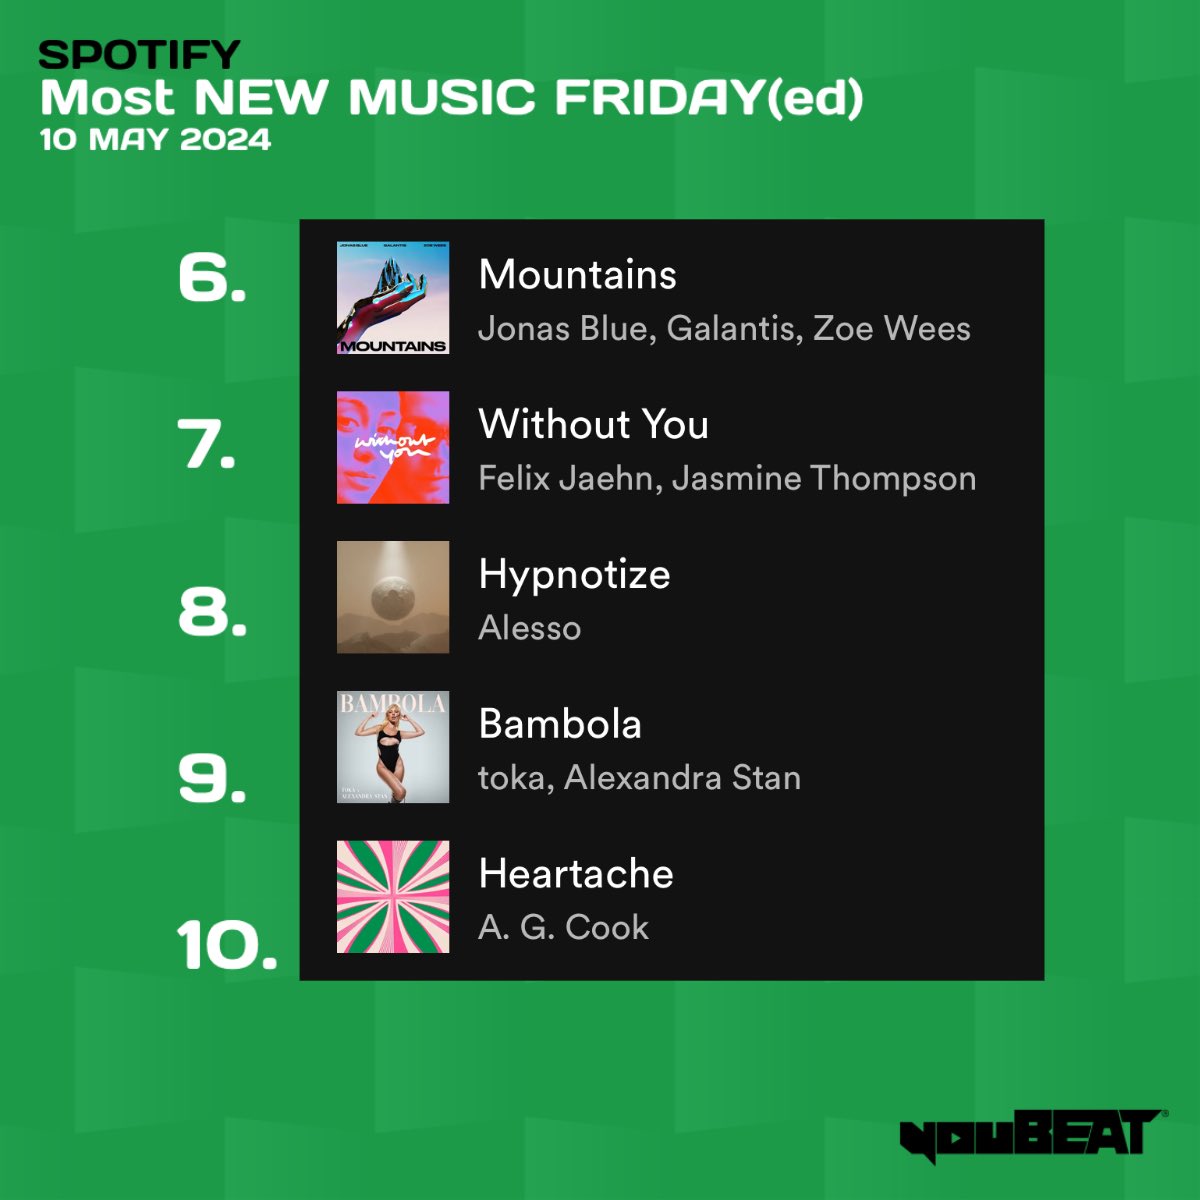 youBEAT MNMF(ed) - Dance/Electronic - May 10th 2024 📊🎶 The 10 most #spotify “New Music Fridayed” dance/electronic tracks of the week globally! 🌍(In chart order) [Powered by #superfridaychart] ▶️ sptfy.com/MNMFed